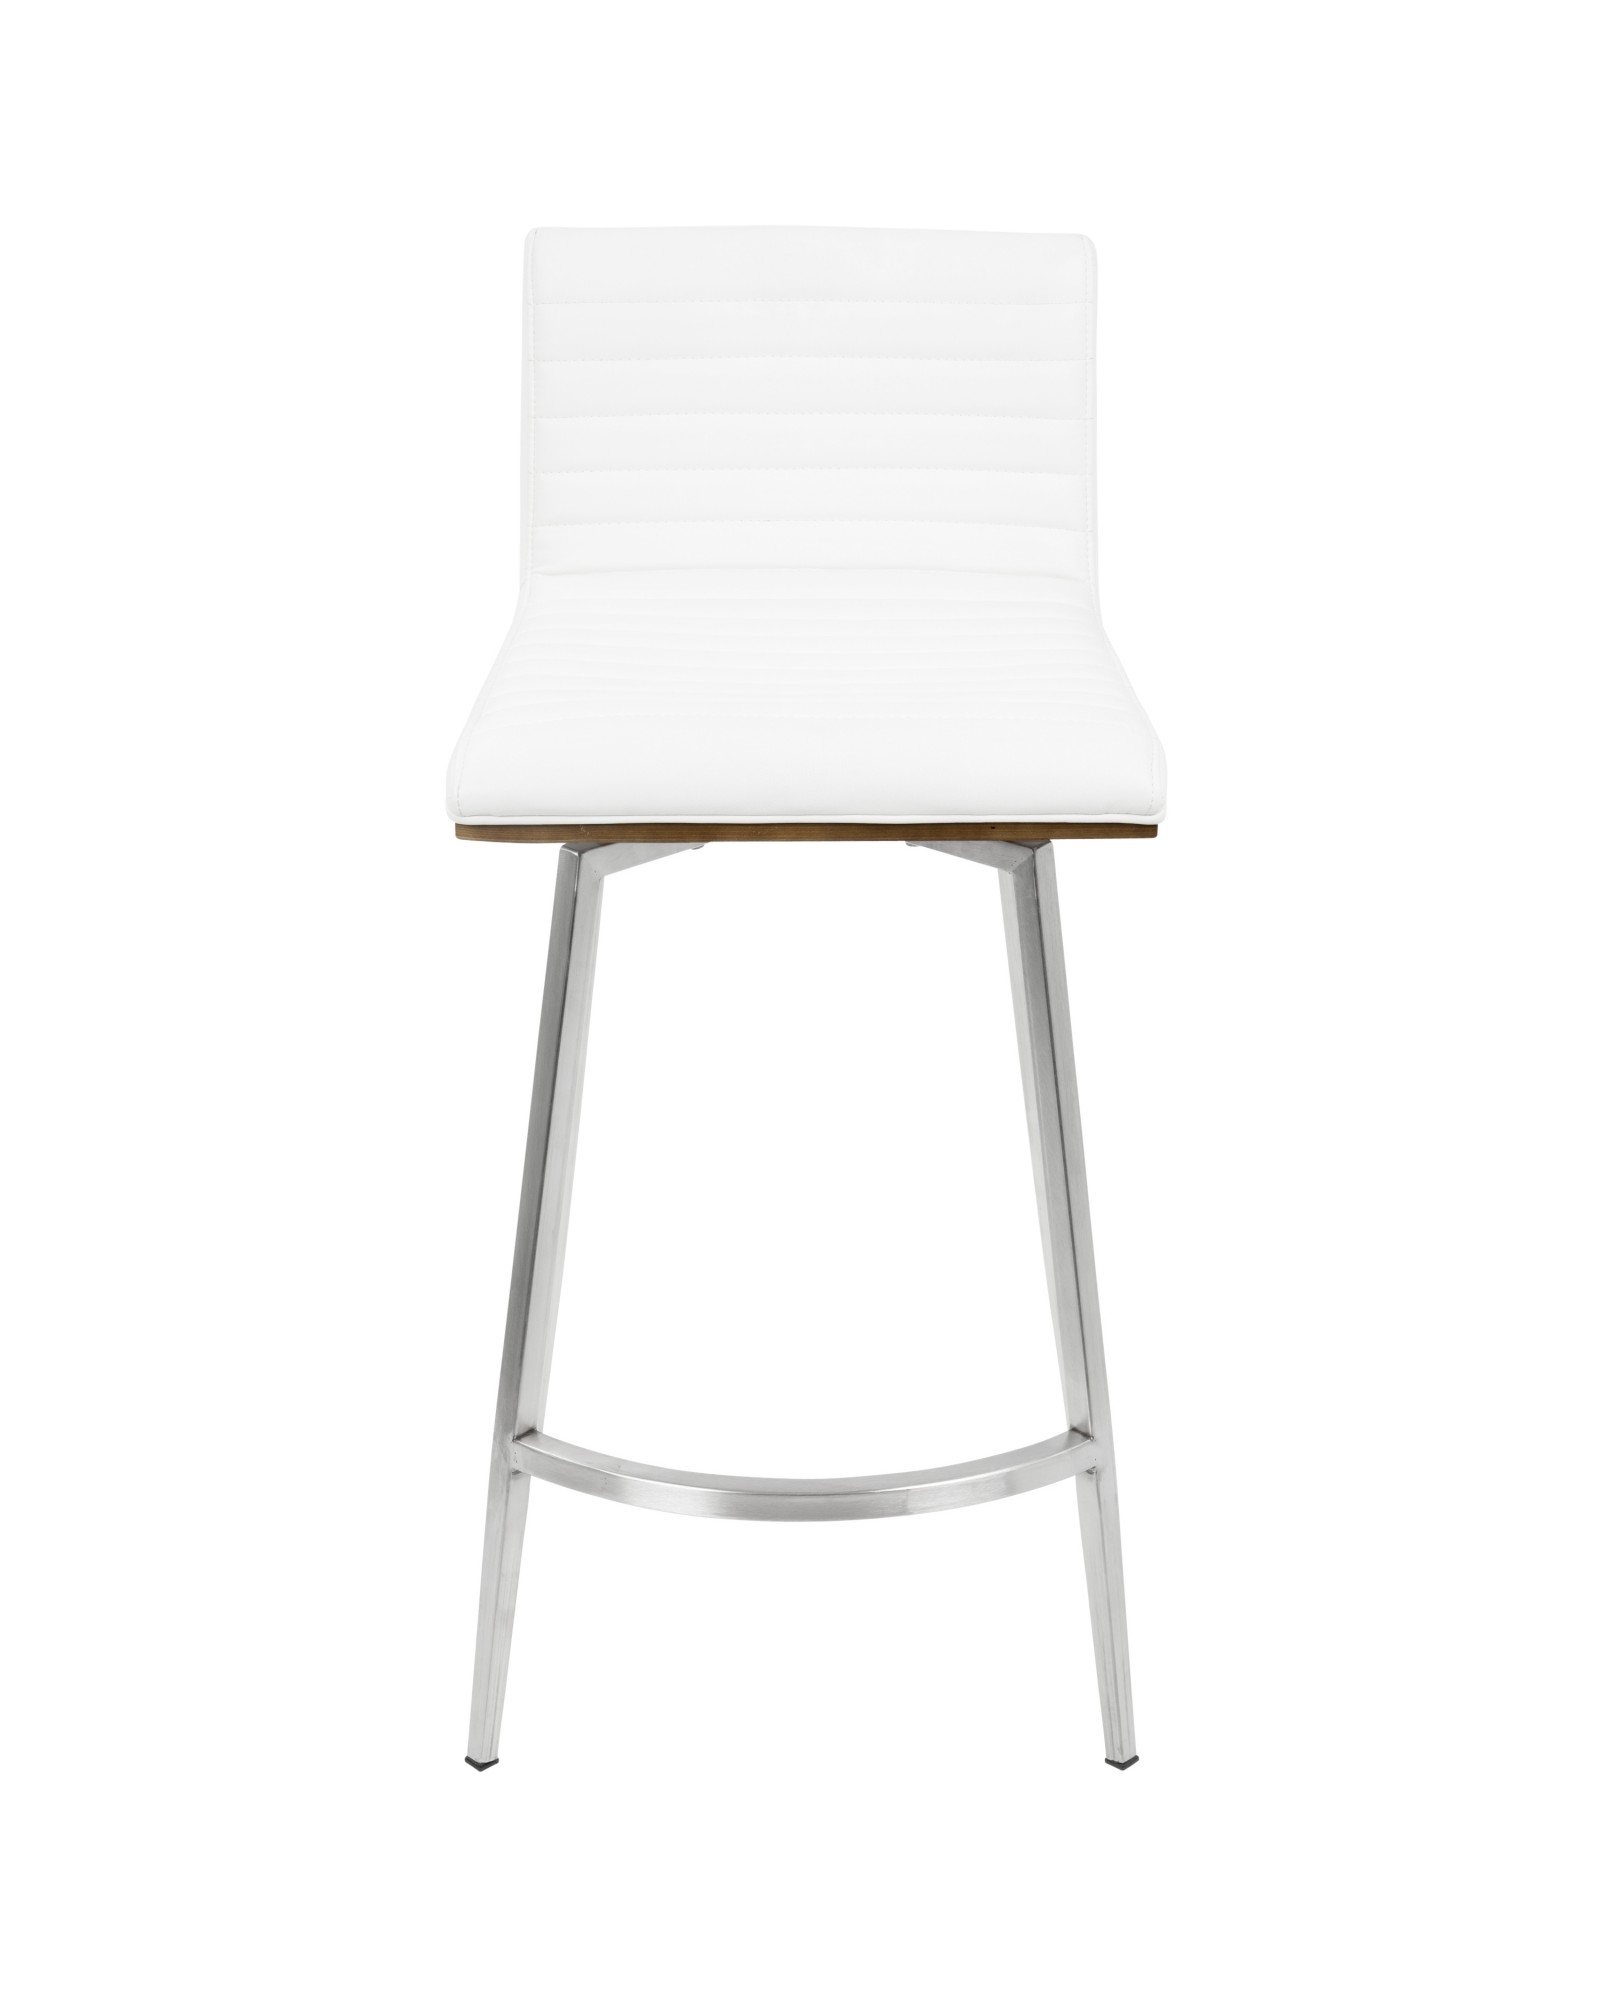 Mason Contemporary Swivel Counter Stool in Stainless Steel, Walnut Wood, and White Faux Leather - Set of 2